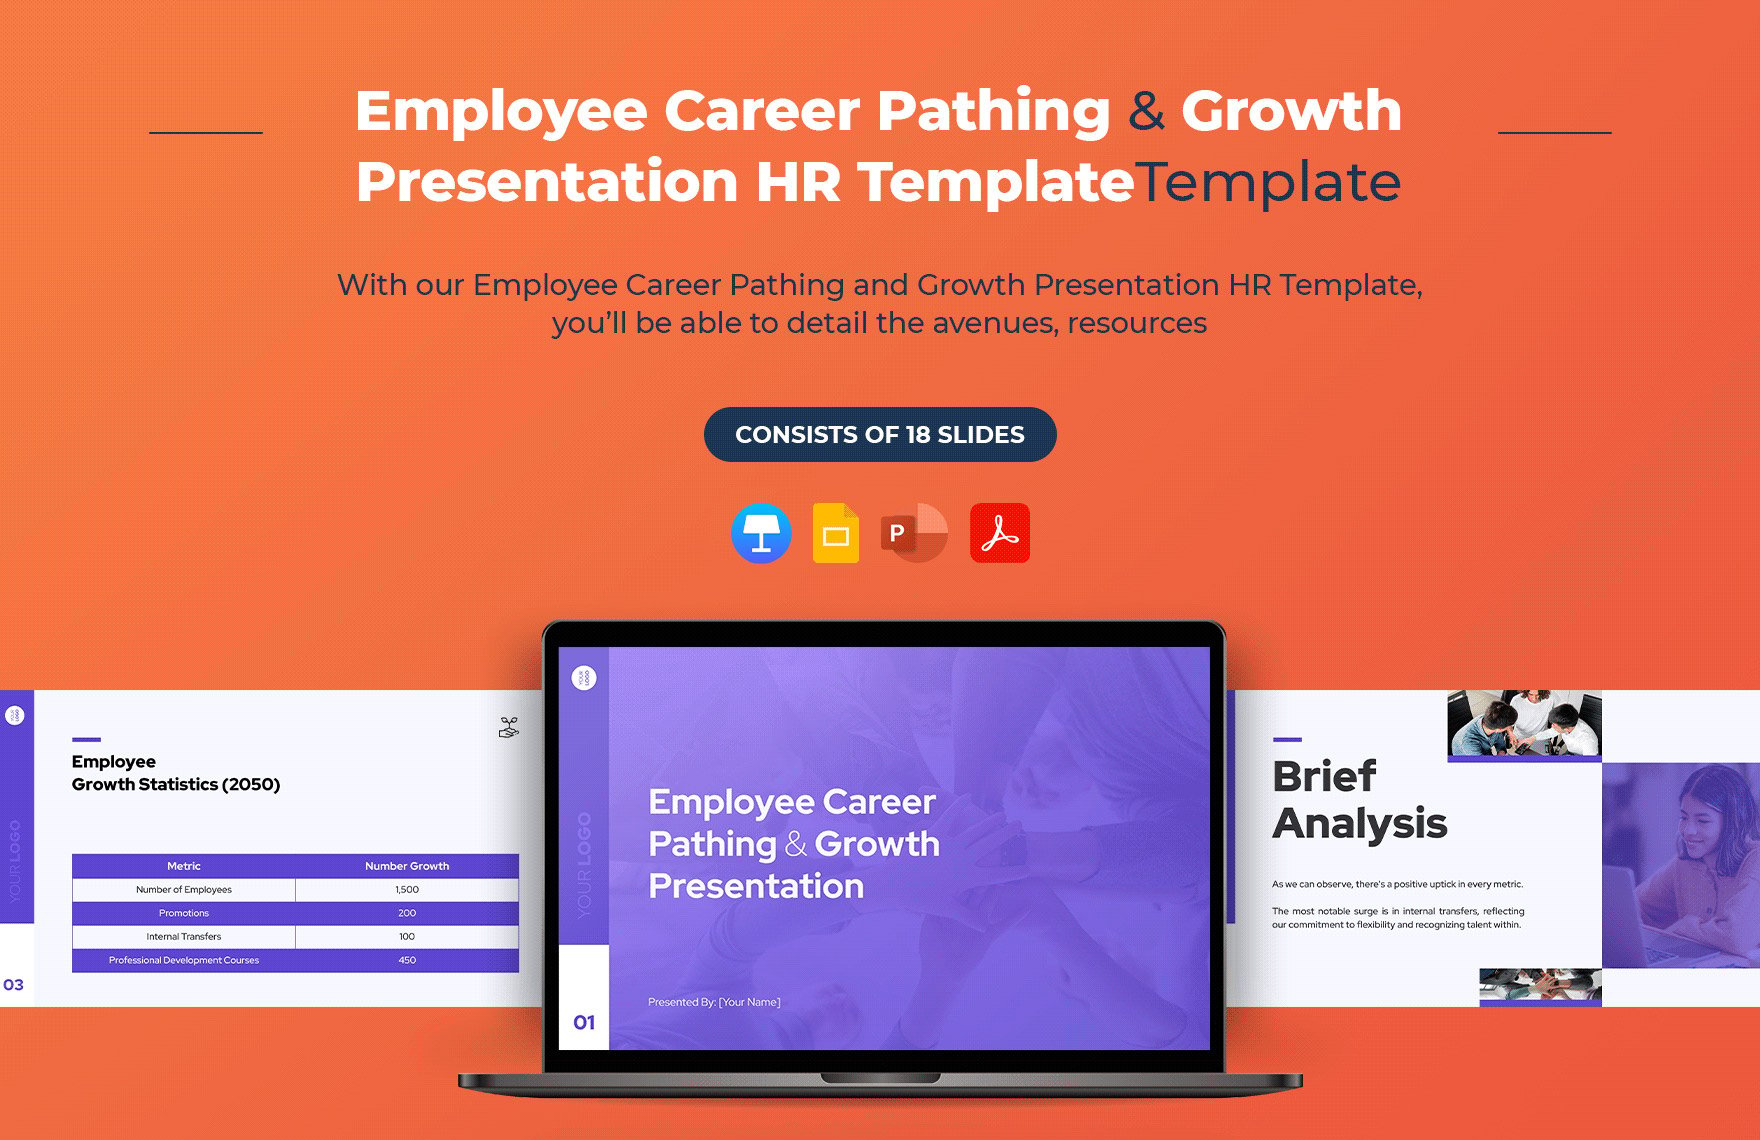 Employee Career Pathing and Growth Presentation HR Template